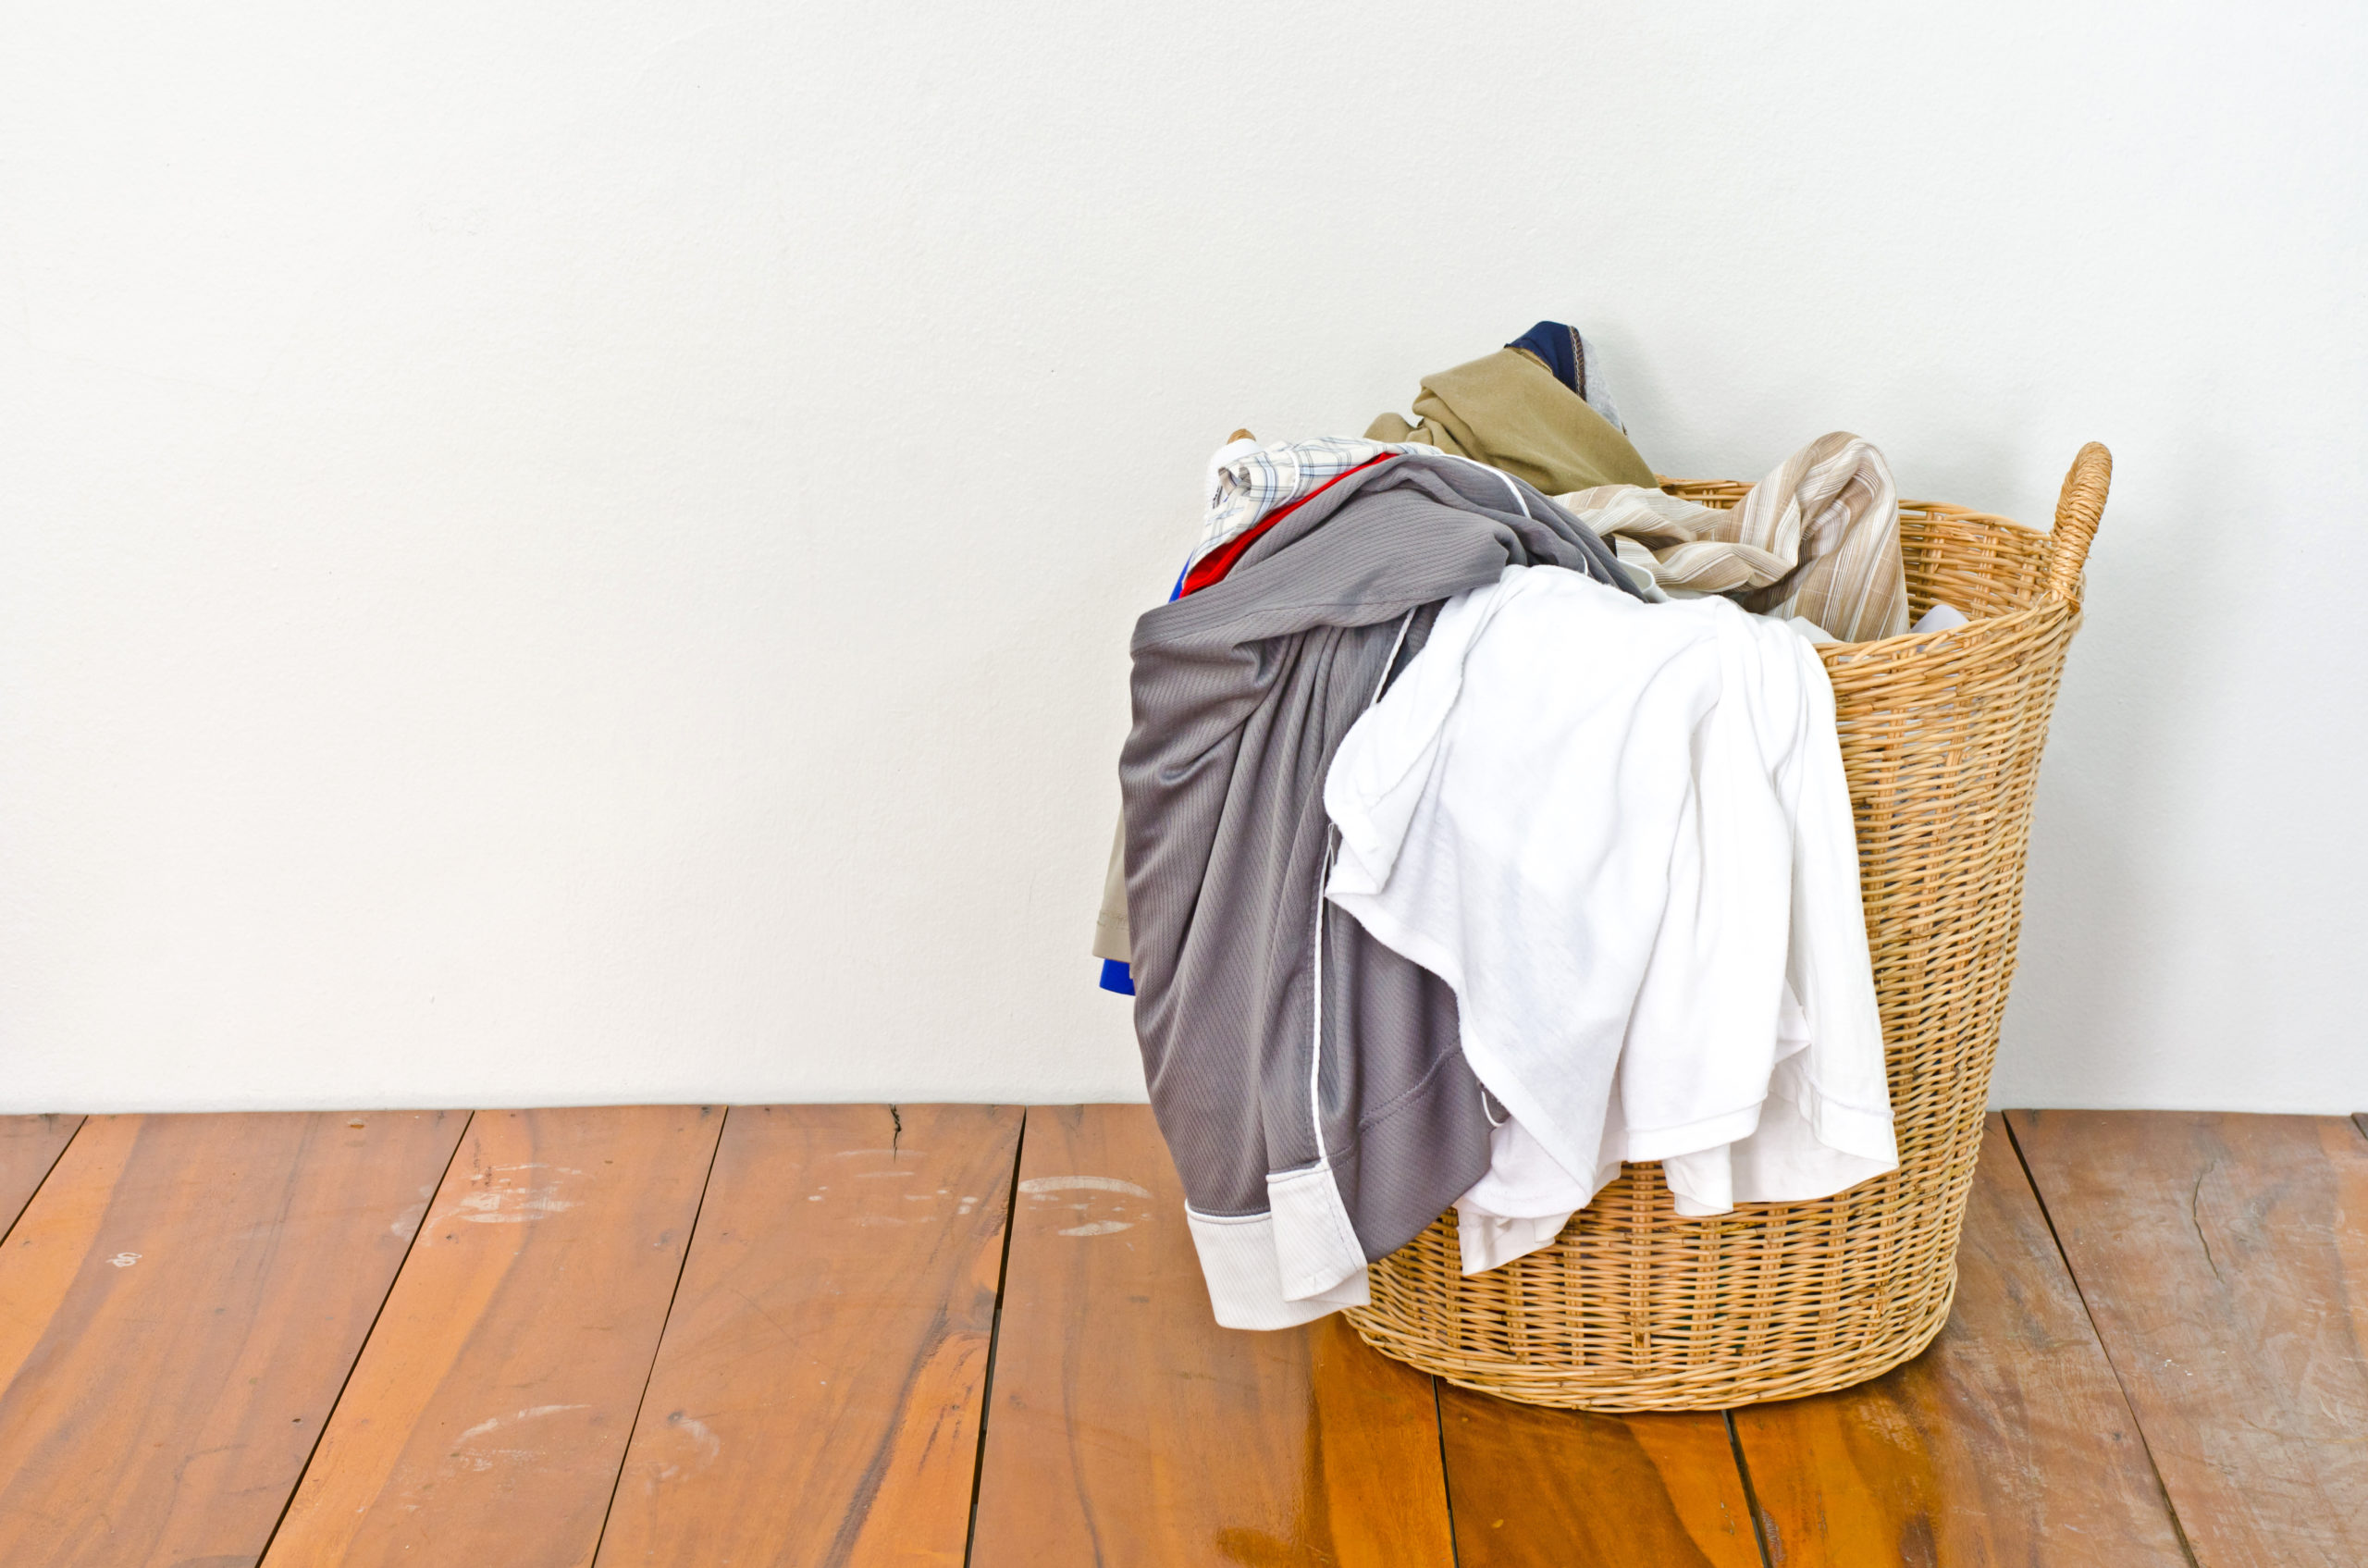 How Often Should You Clean Laundry Baskets or Hampers?